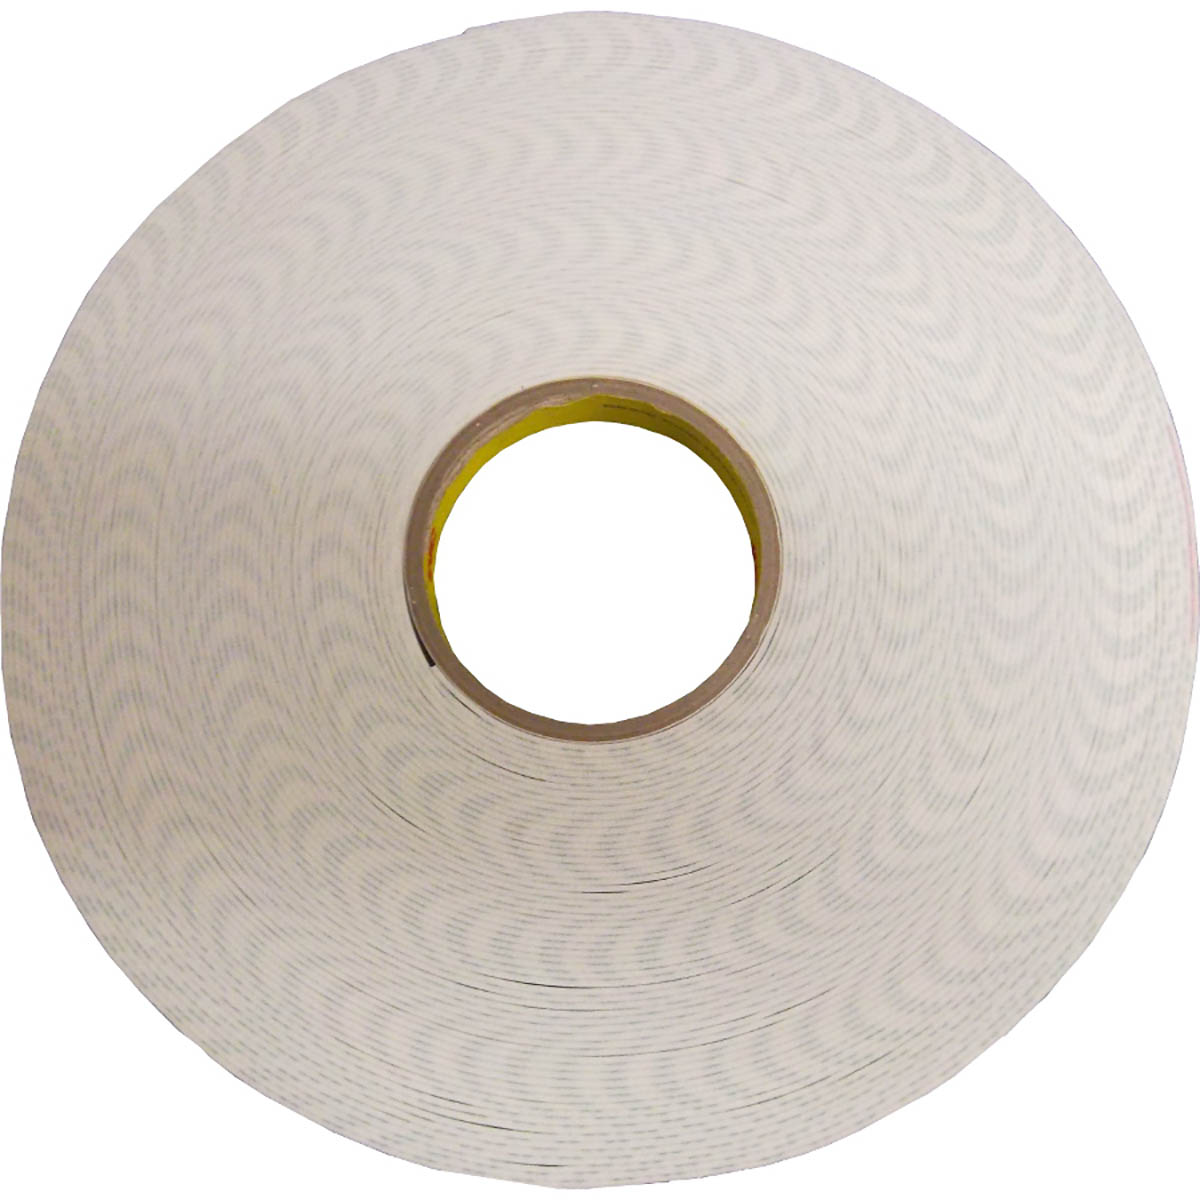 3M Scotch-Mount 4016 Double Sided Tape Side